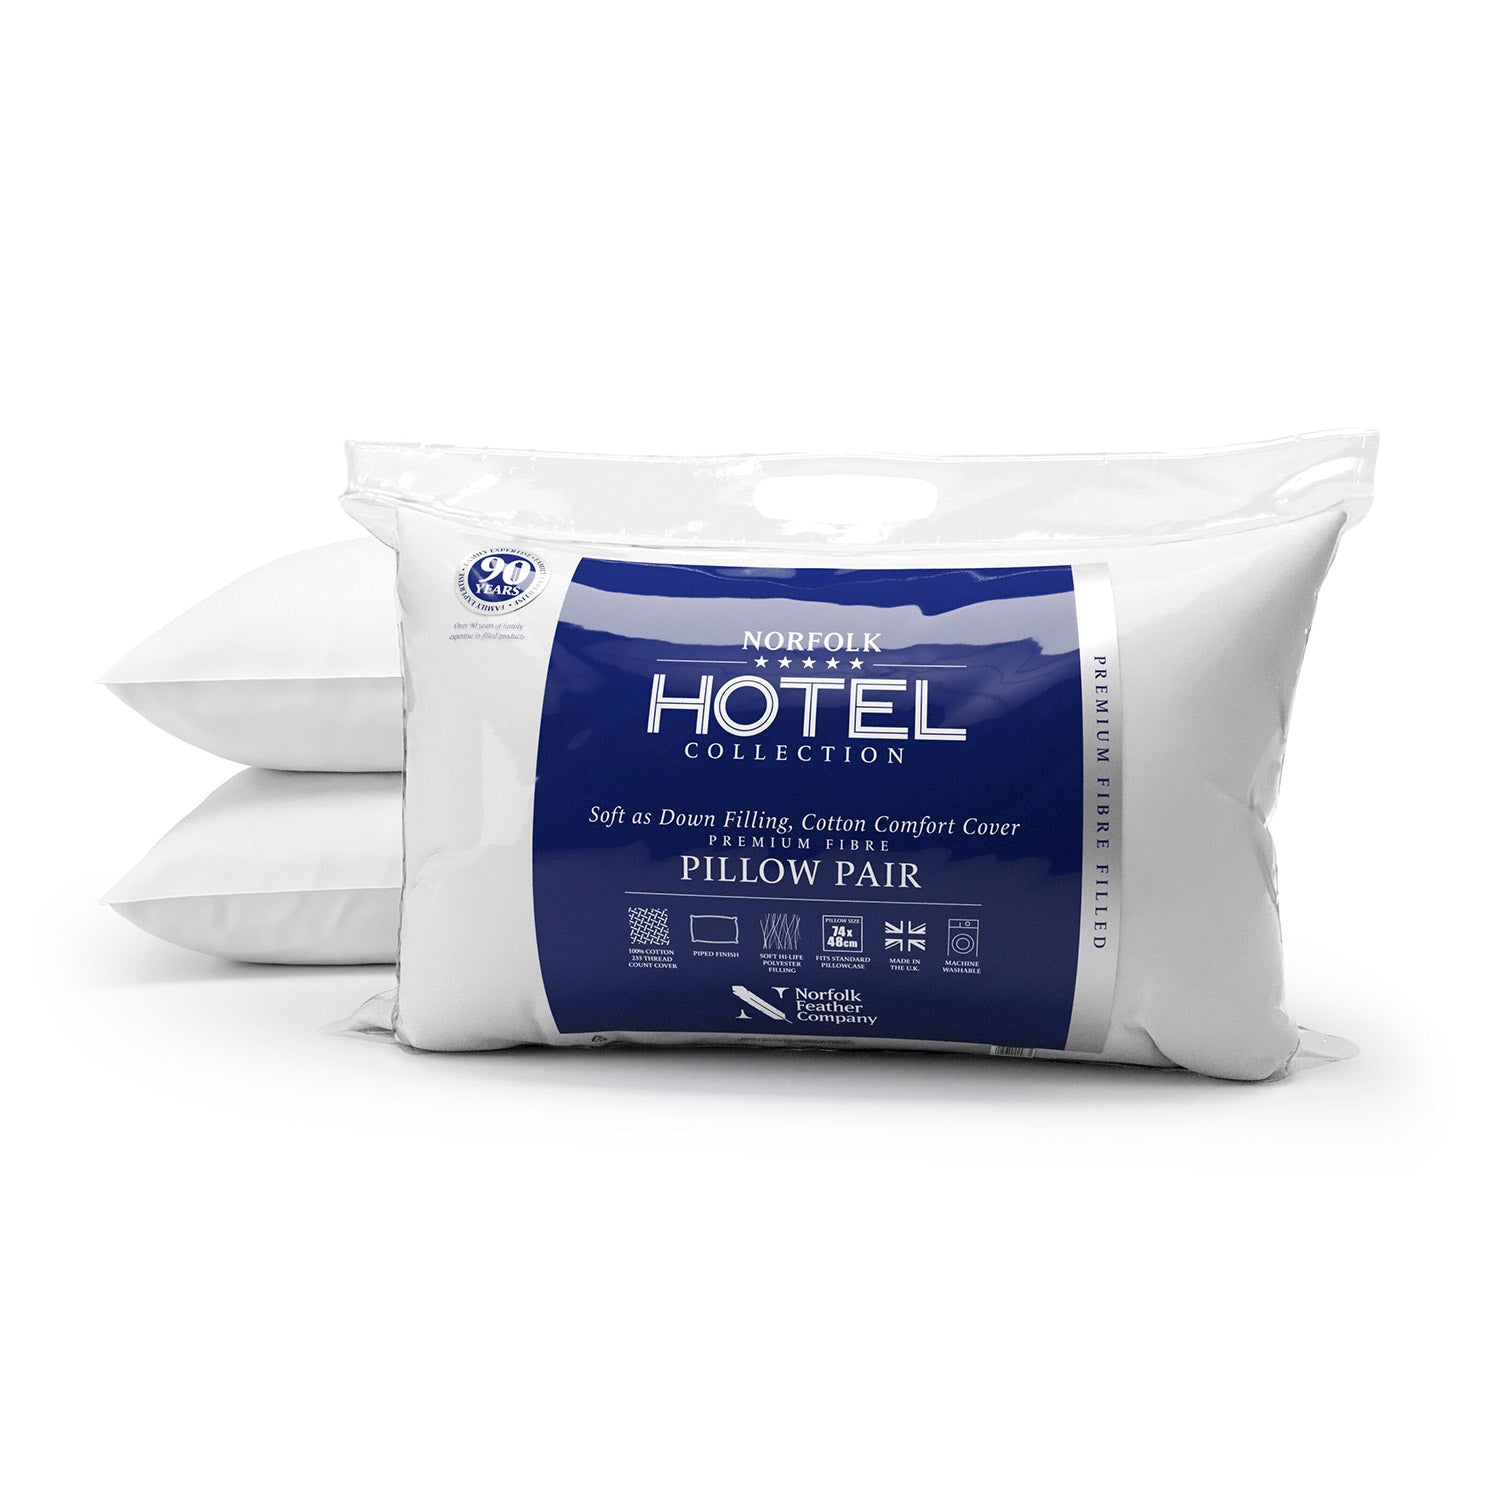 Norfolk 5* Hotel Collection | Feels Like Down Pillow Pair